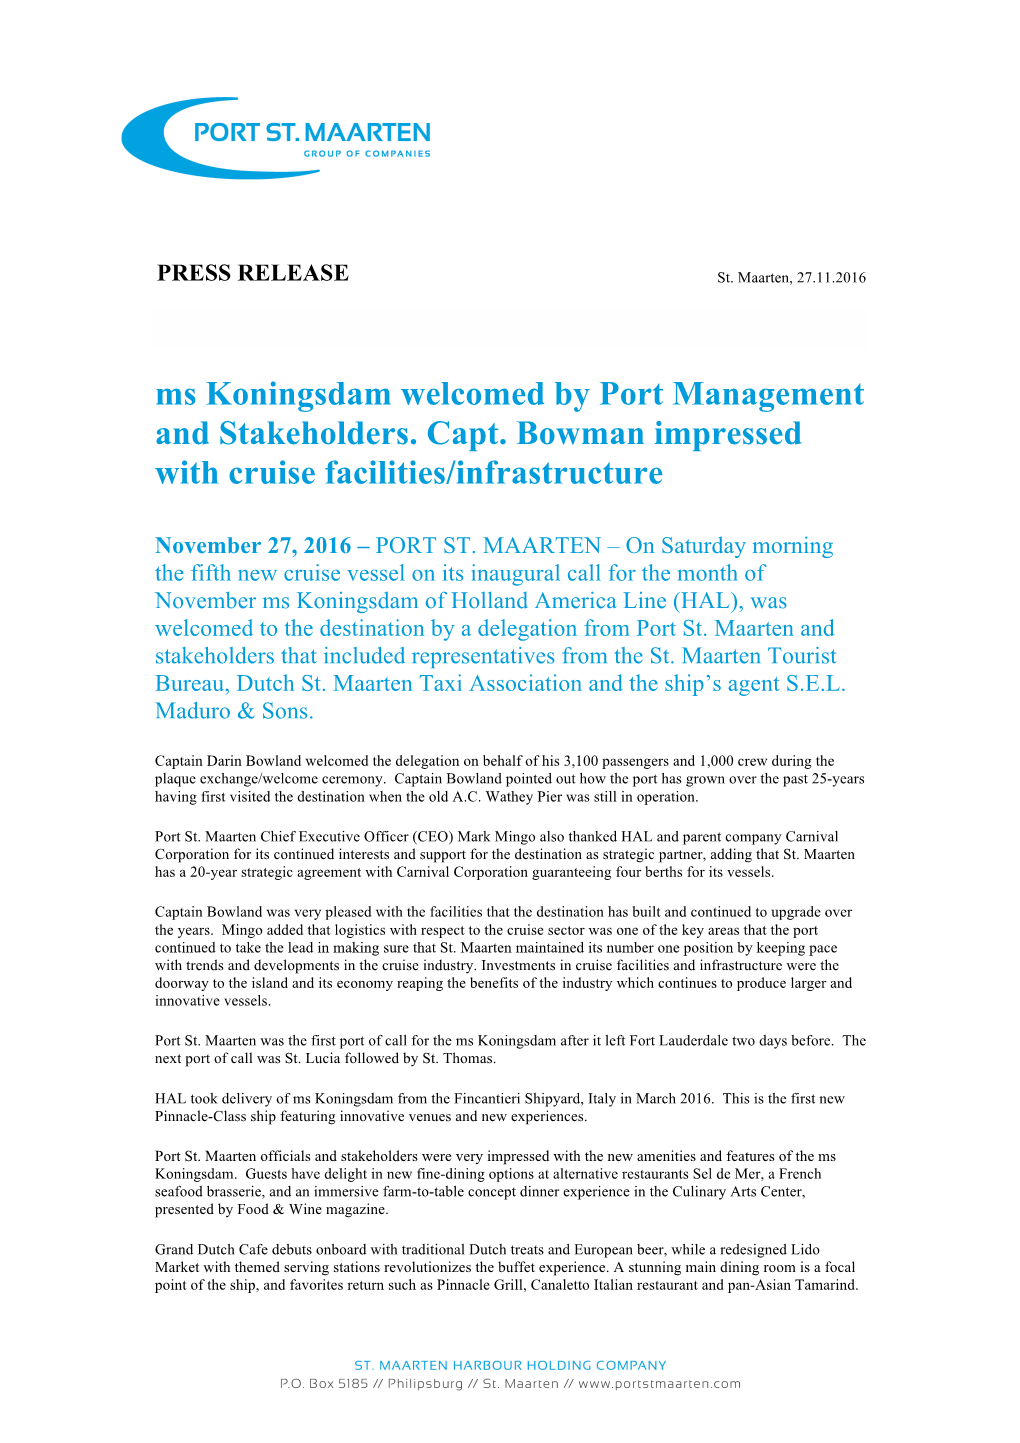 Ms Koningsdam Welcomed by Port Management and Stakeholders